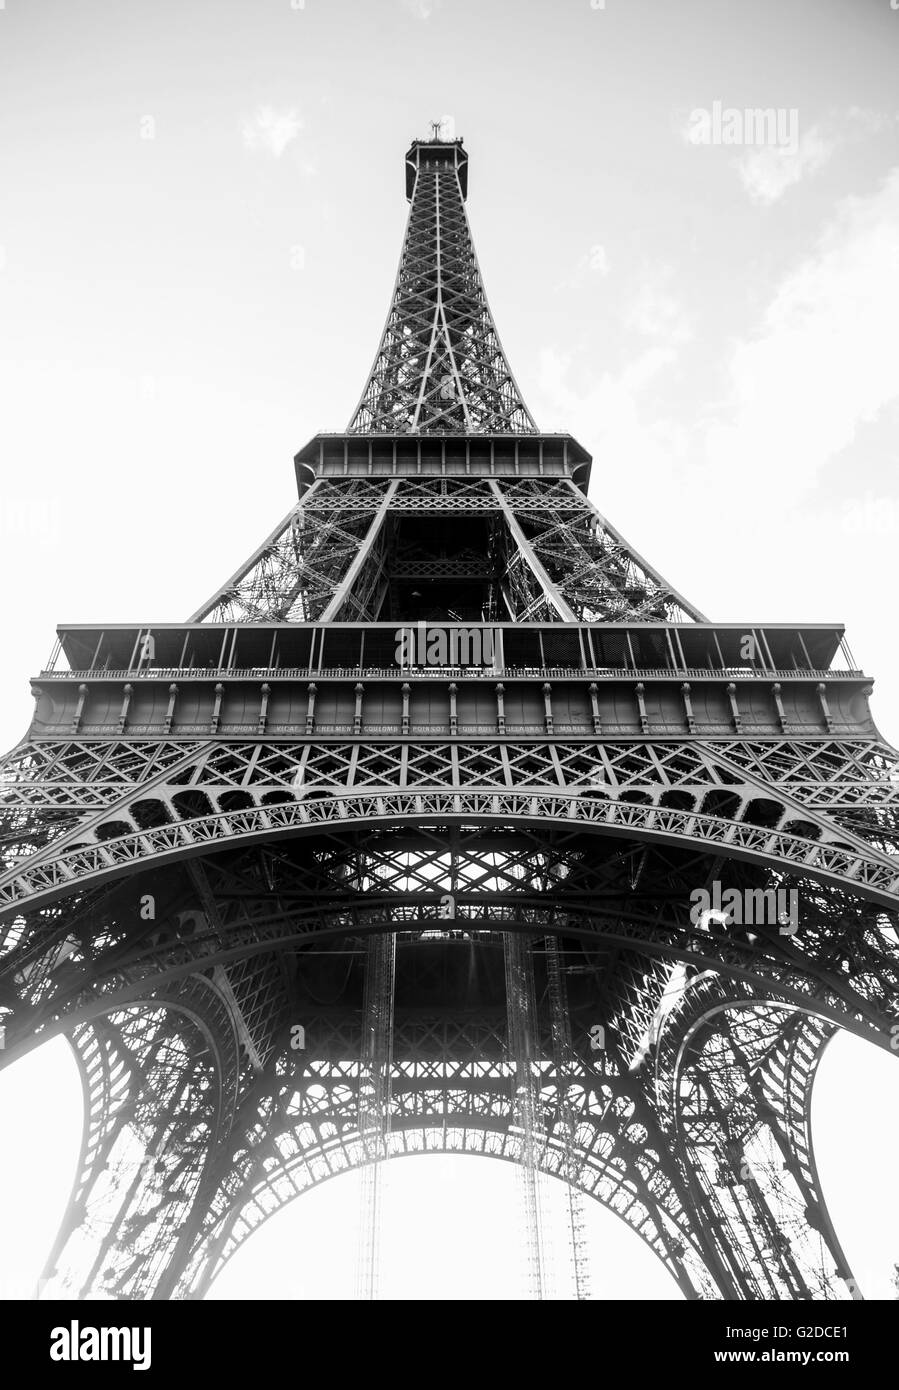 Eiffel Tower, Low Angle View, Paris, France Stock Photo